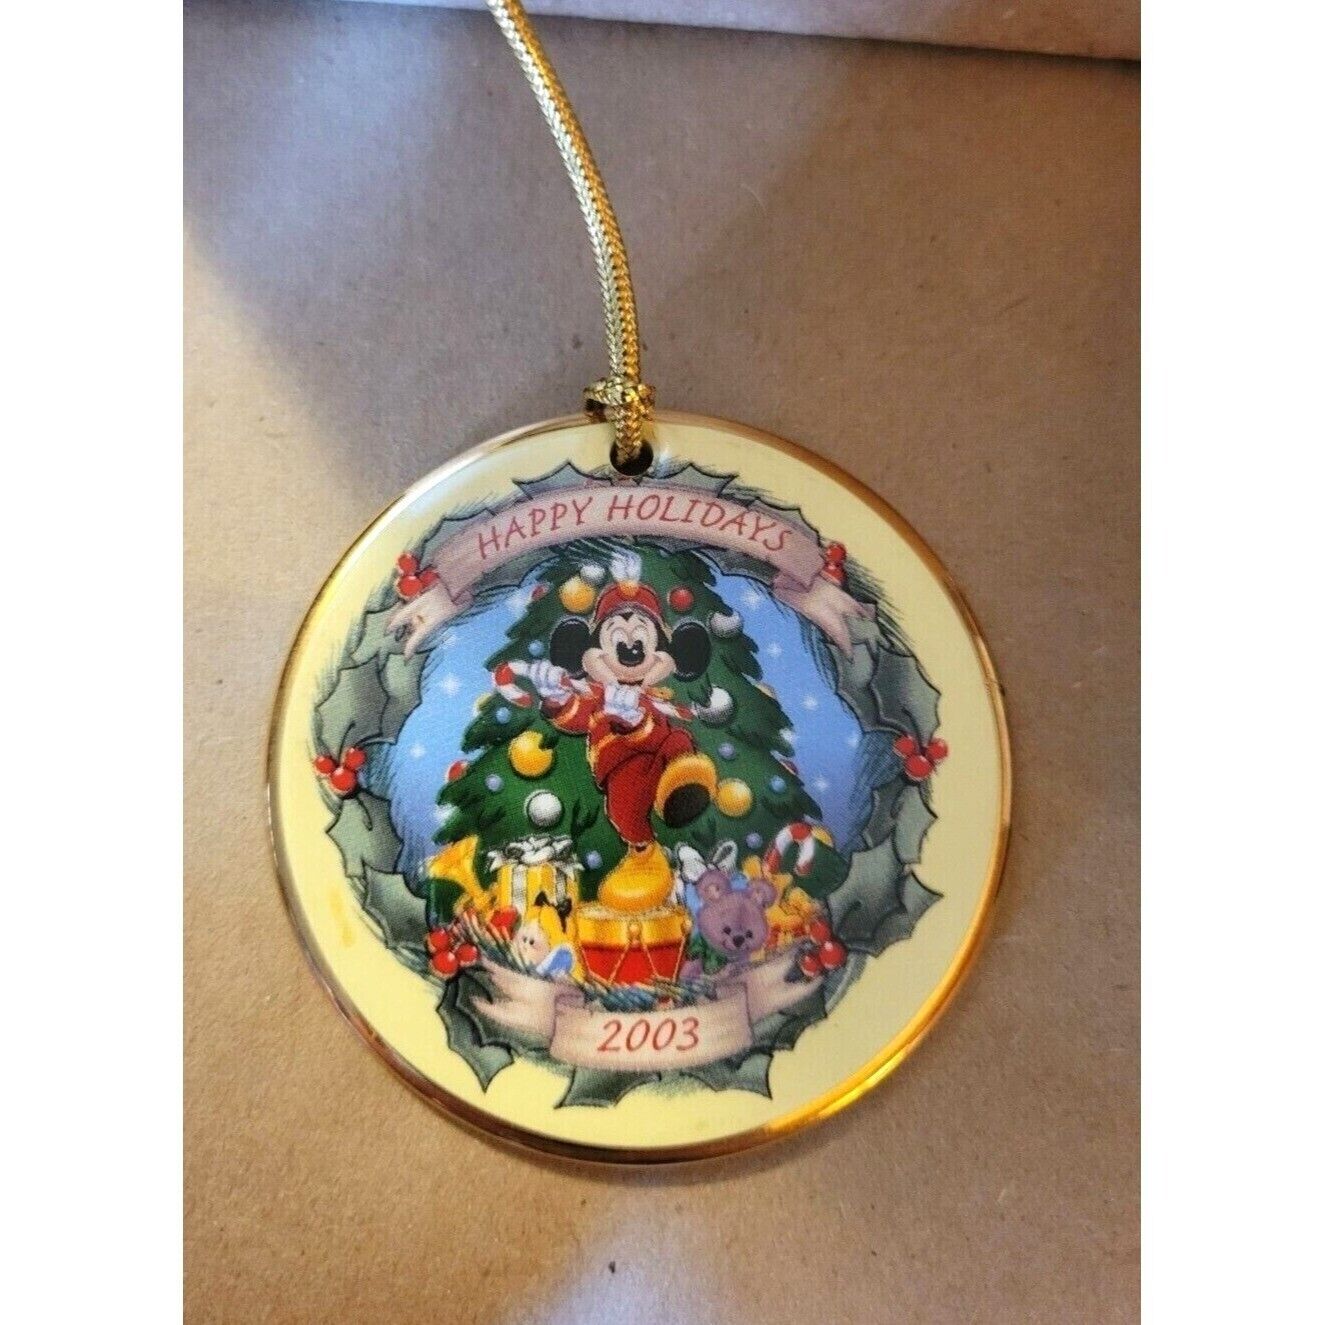 2003 Disney\'s Christmas Ceramic Ornament featuring Mickey Mouse